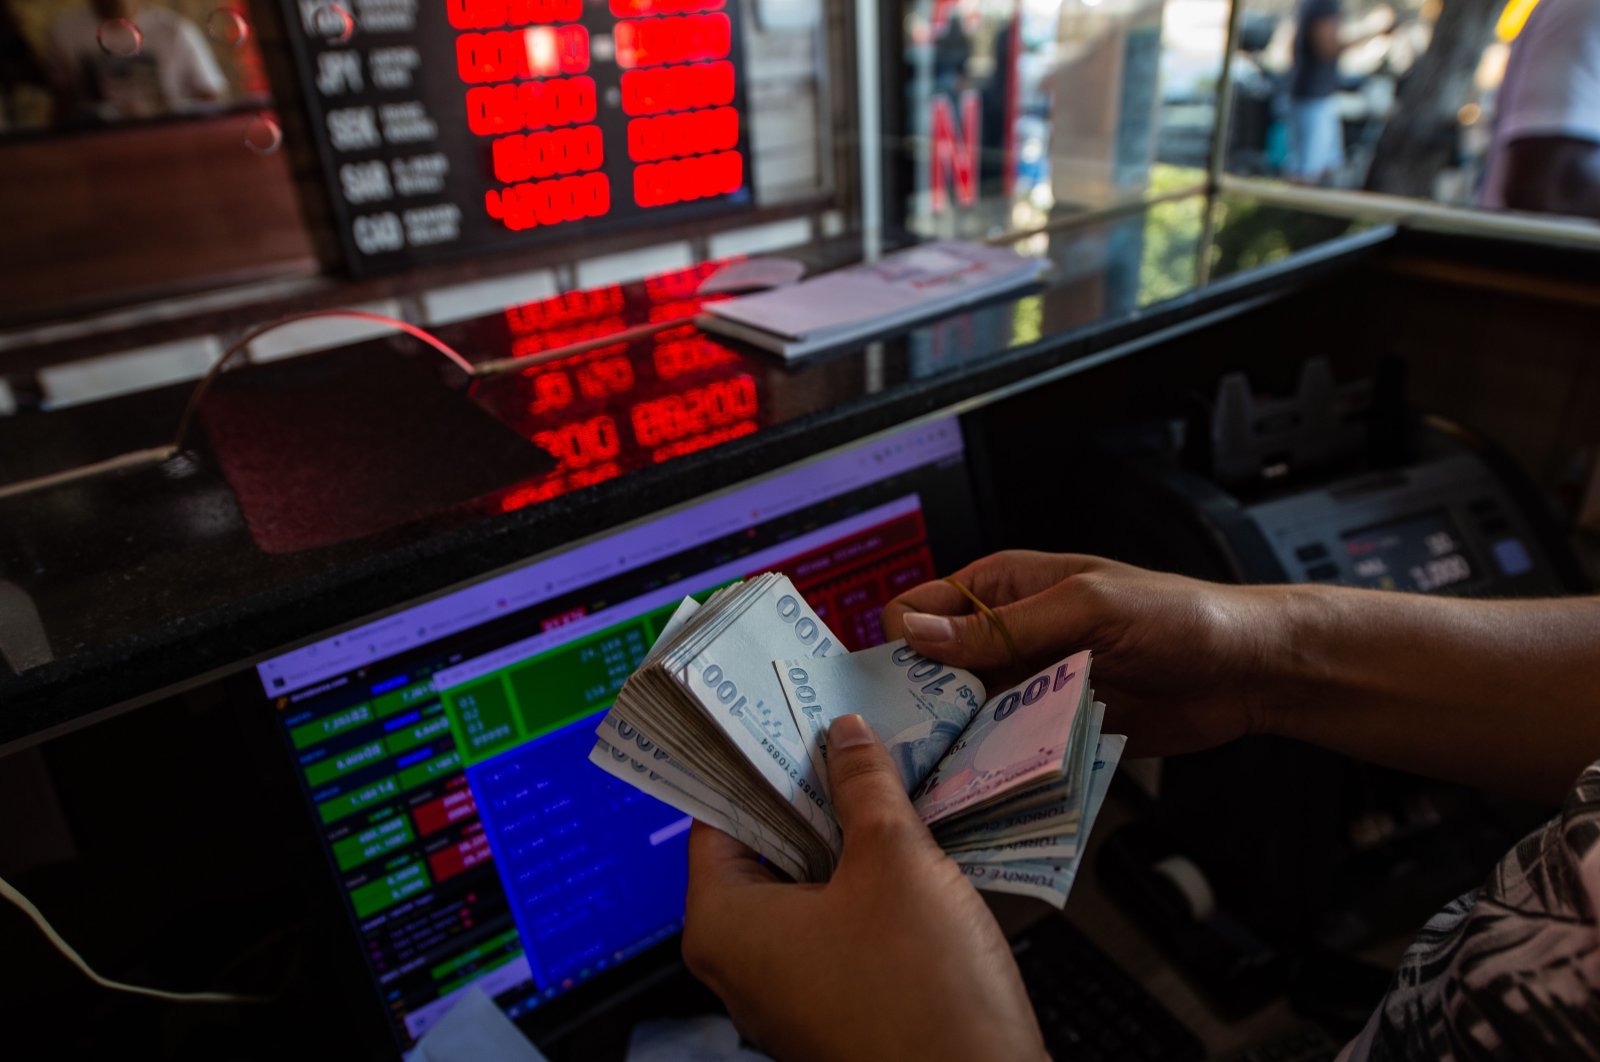 A currency exchange office worker counts Turkish lira banknotes in front of the electronic panel displaying currency exchange rates at an exchange office in Istanbul, Aug. 6, 2020. (AFP Photo)